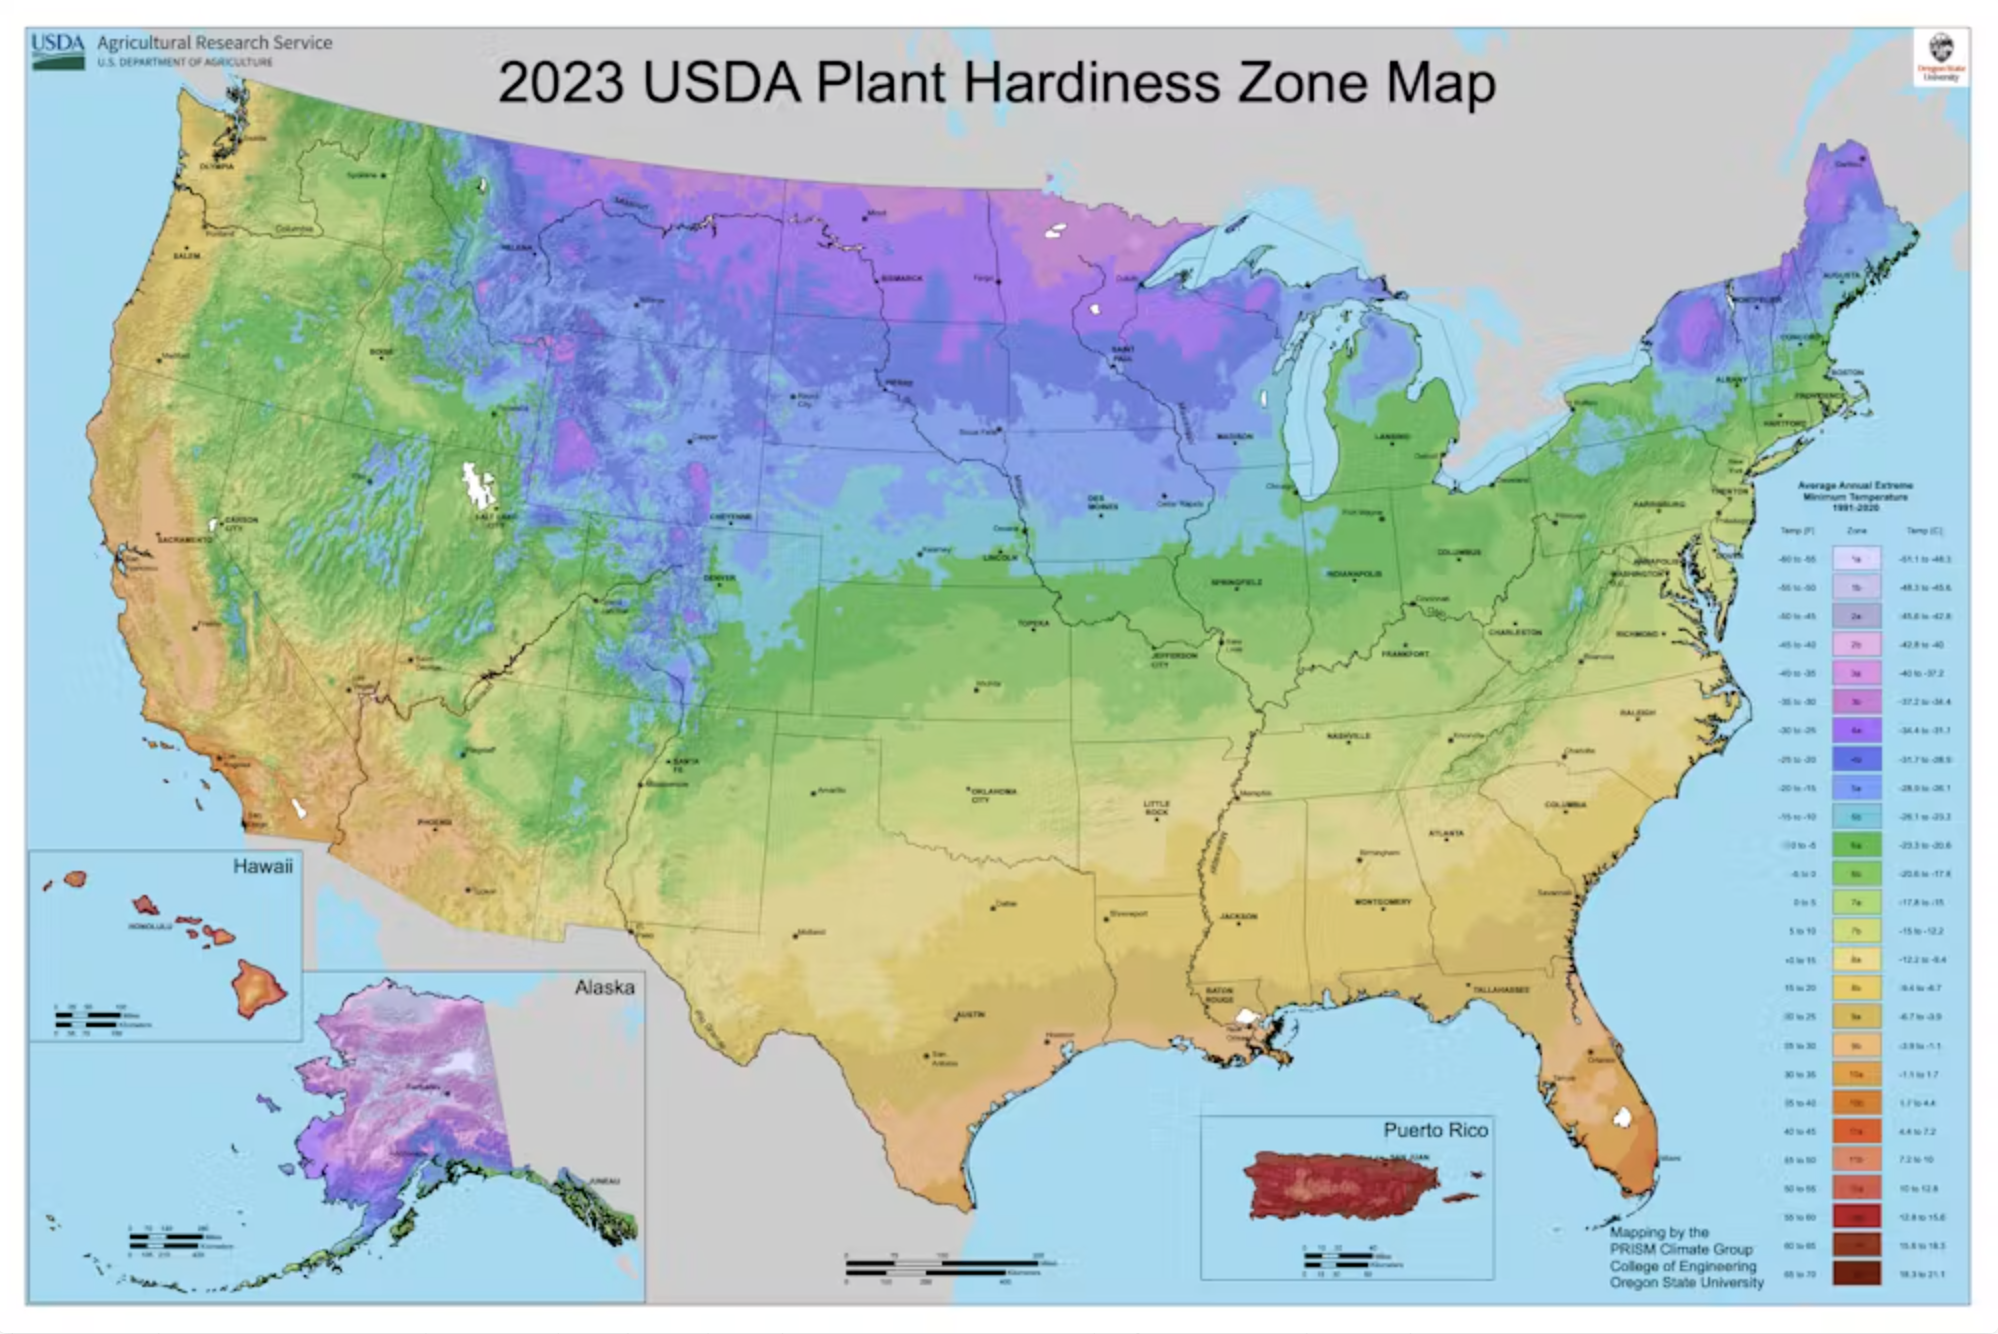 The 2023 USDA plant hardiness zone map shows the areas where plants can be expected to grow, based on extreme winter temperatures. Darker shades (purple to blue) denote colder zones, phasing southward into temperate (green) and warm zones (yellow and orange). USDA